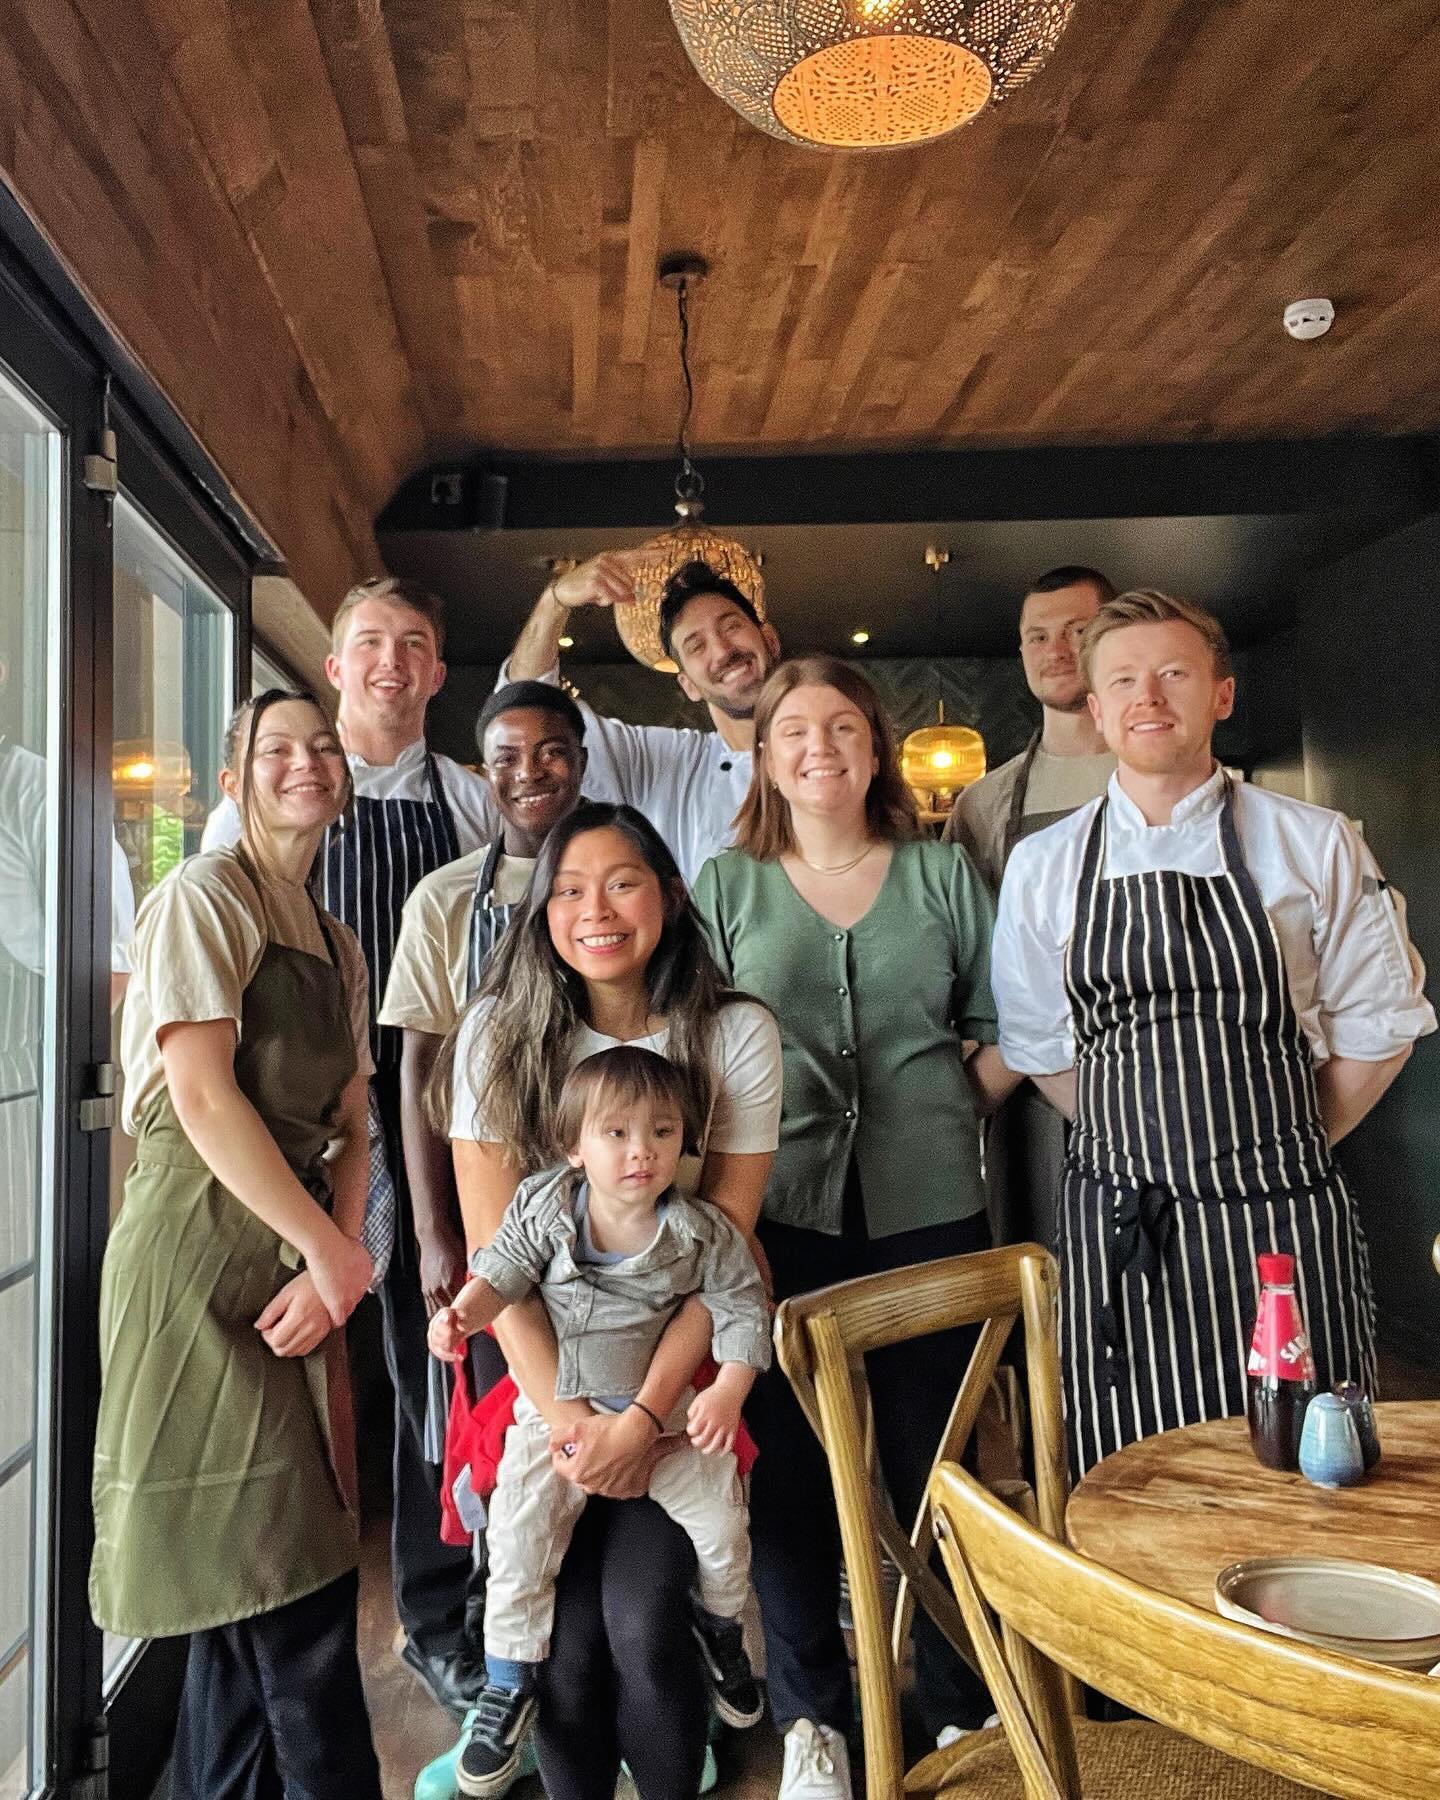 One whole year of Noah&rsquo;s! 🥂
 
Yesterday marked a year since we first opened the doors of our restaurant wedged under the flyover at Cumberland Basin. We&rsquo;re so grateful to everyone who&rsquo;s visited and continues to support us on this j